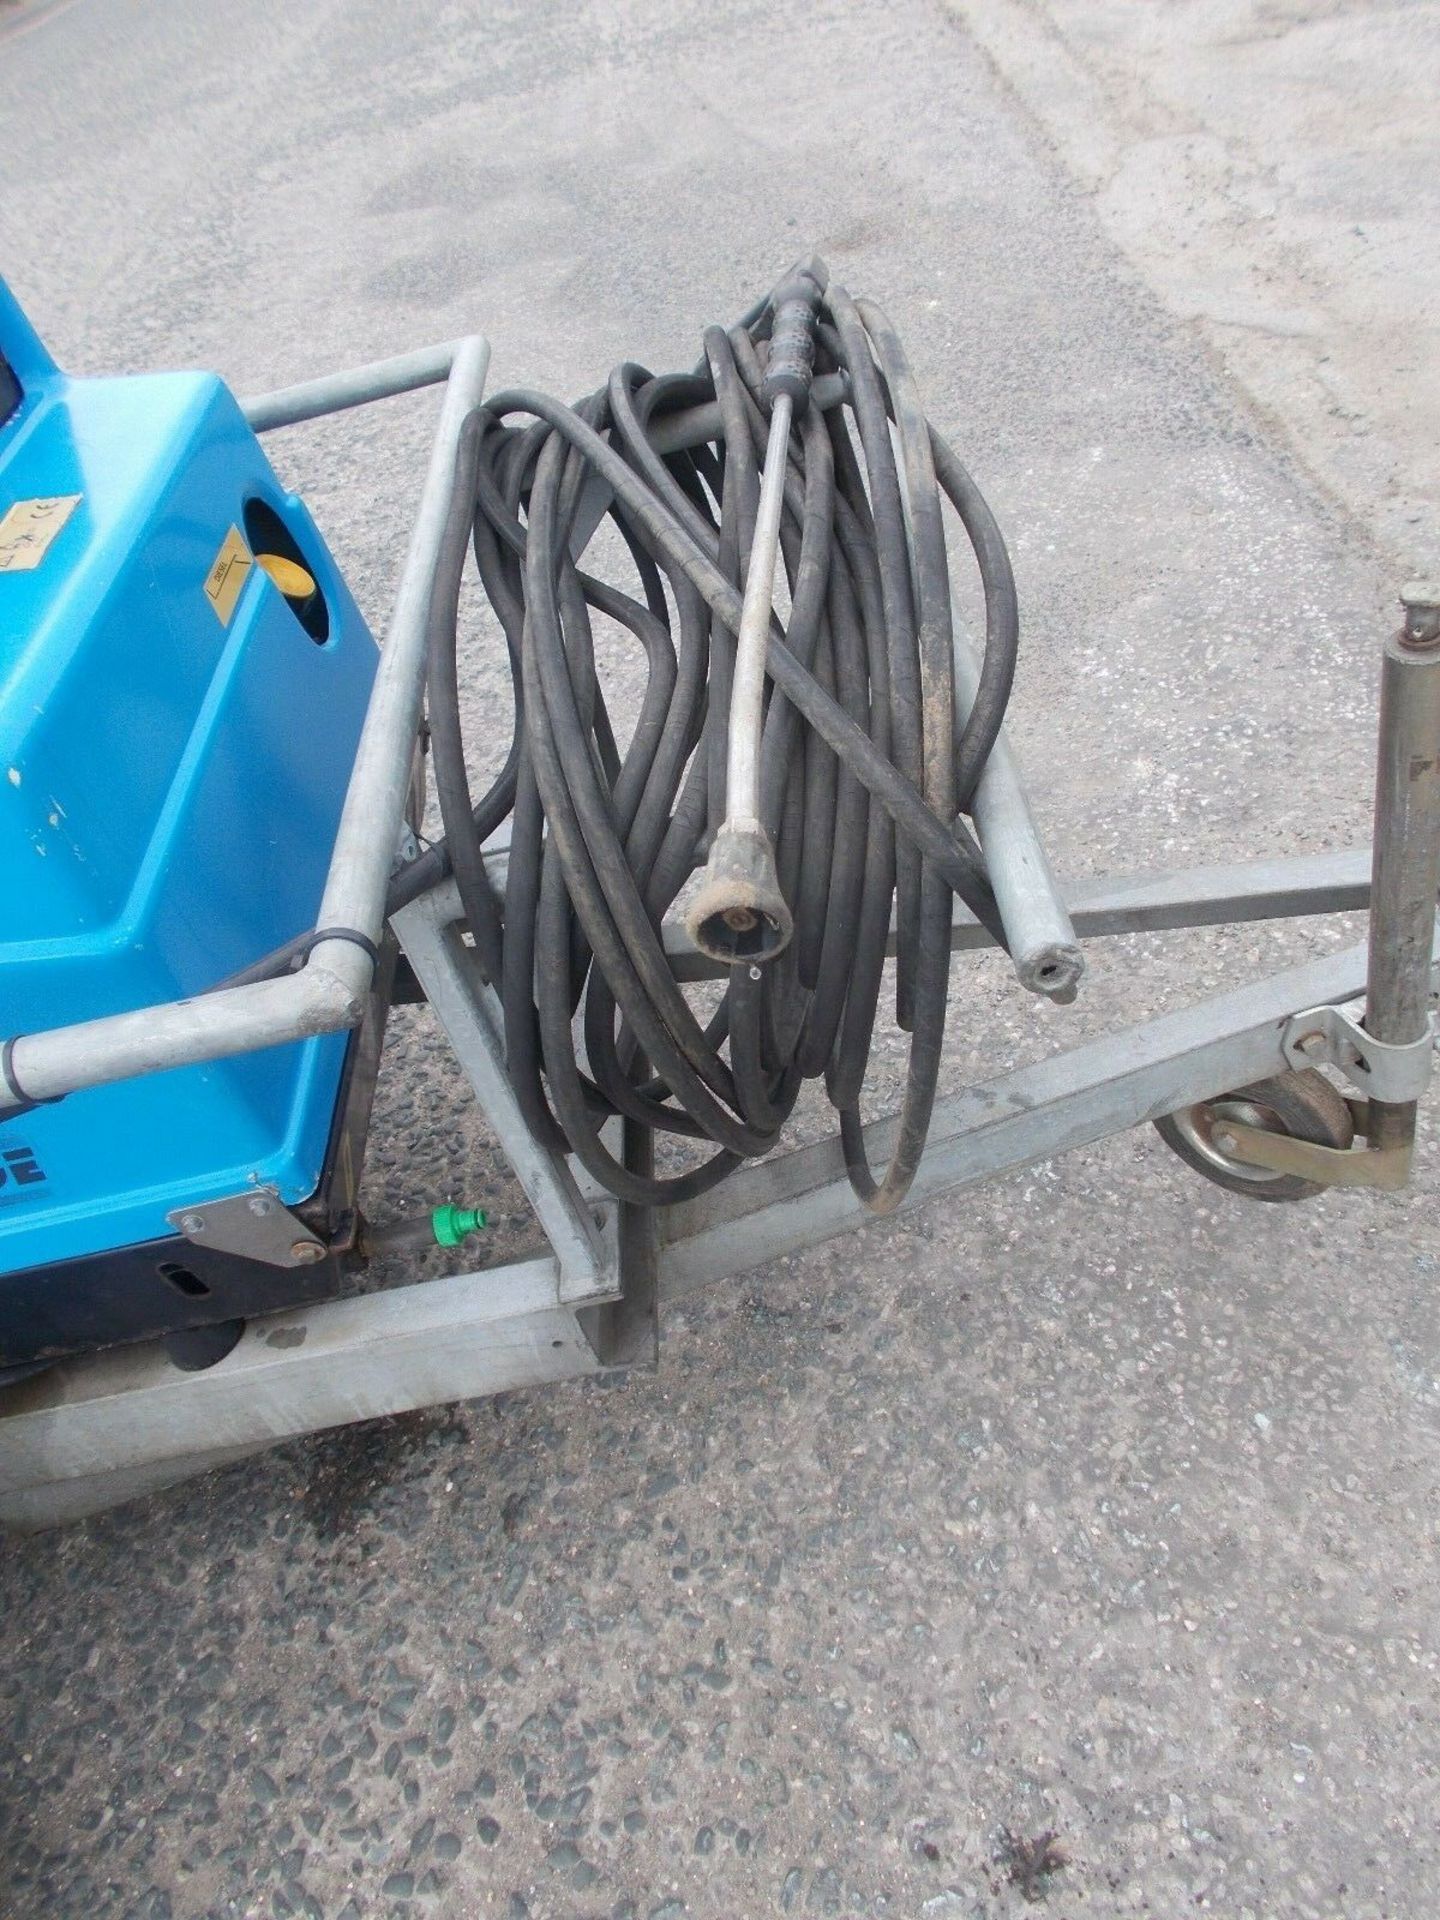 Edge V 200 MD Towable Hot & Cold Diesel Engined Pressure Washer - Image 5 of 7